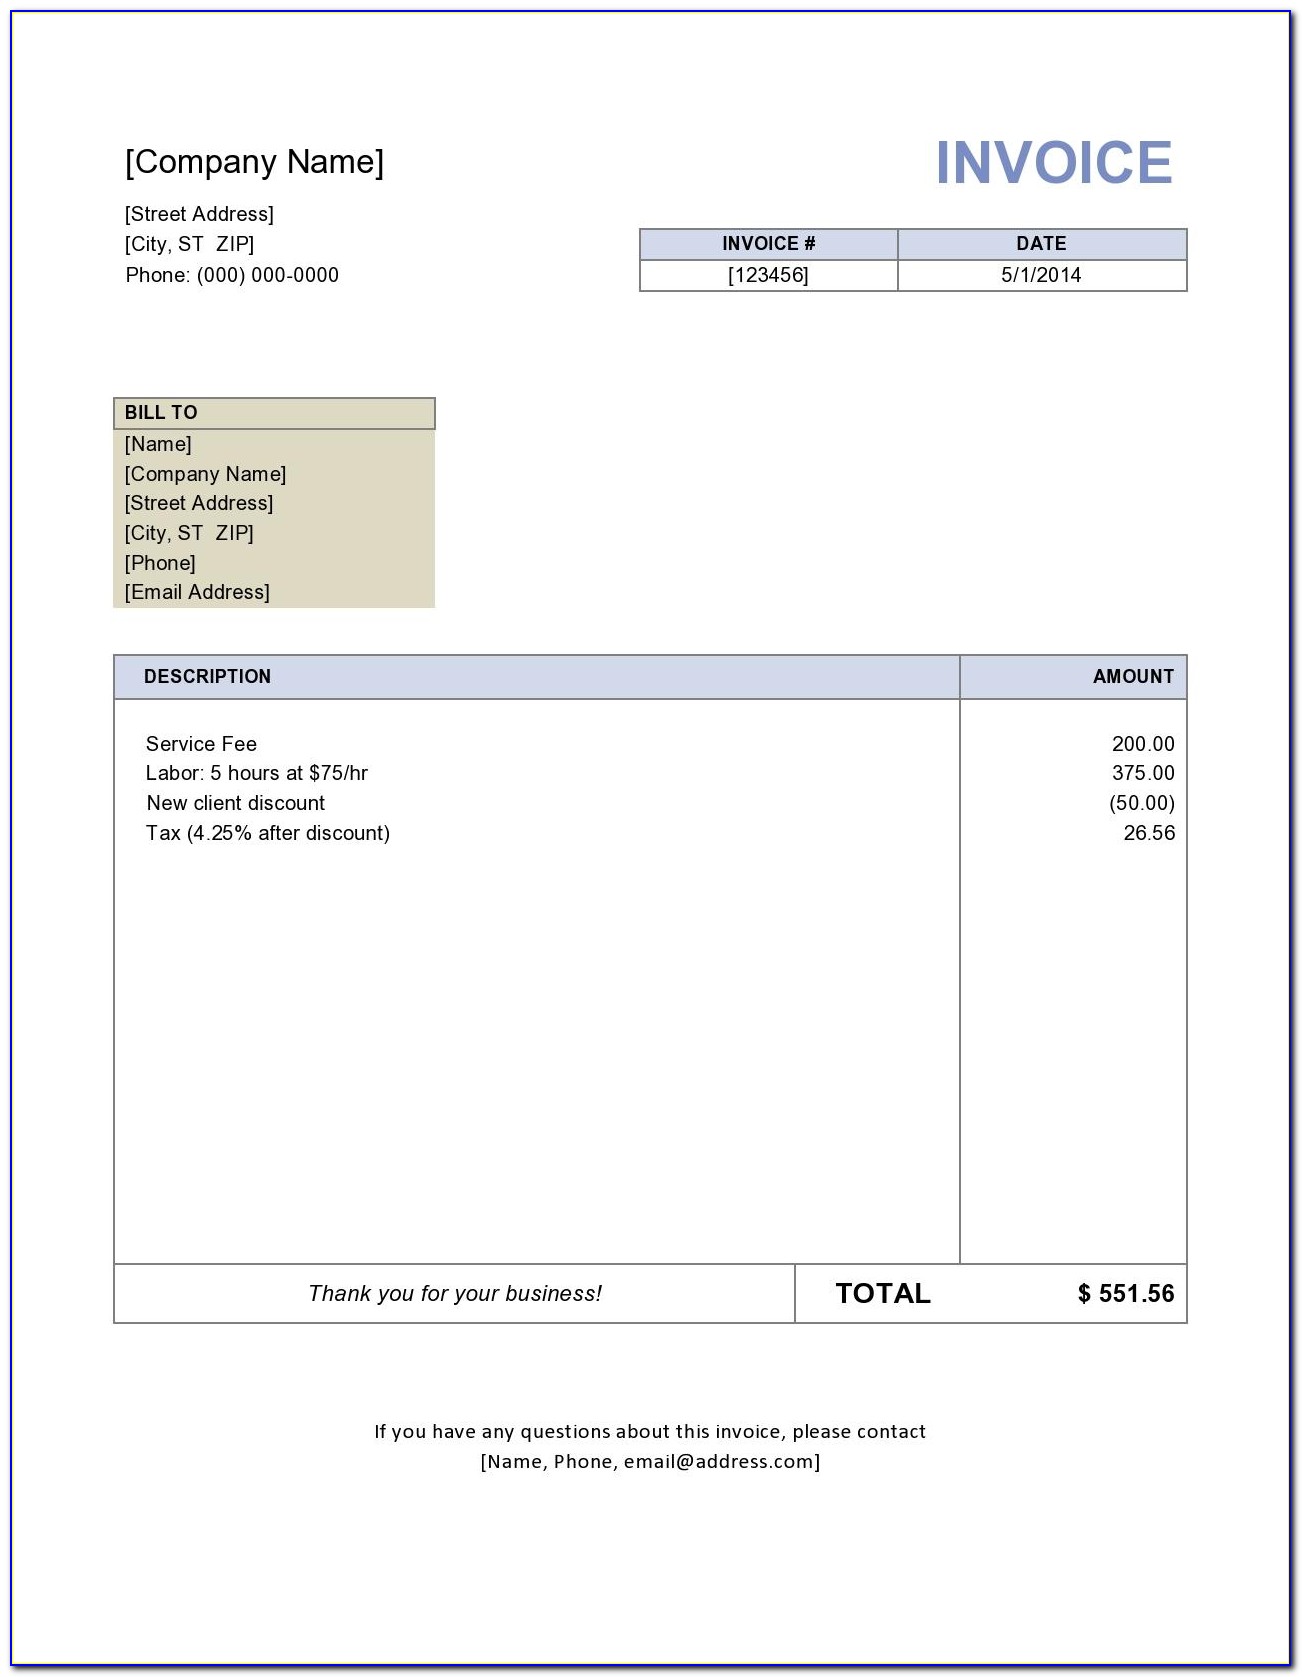 Hotel Invoice Word Format Free Download